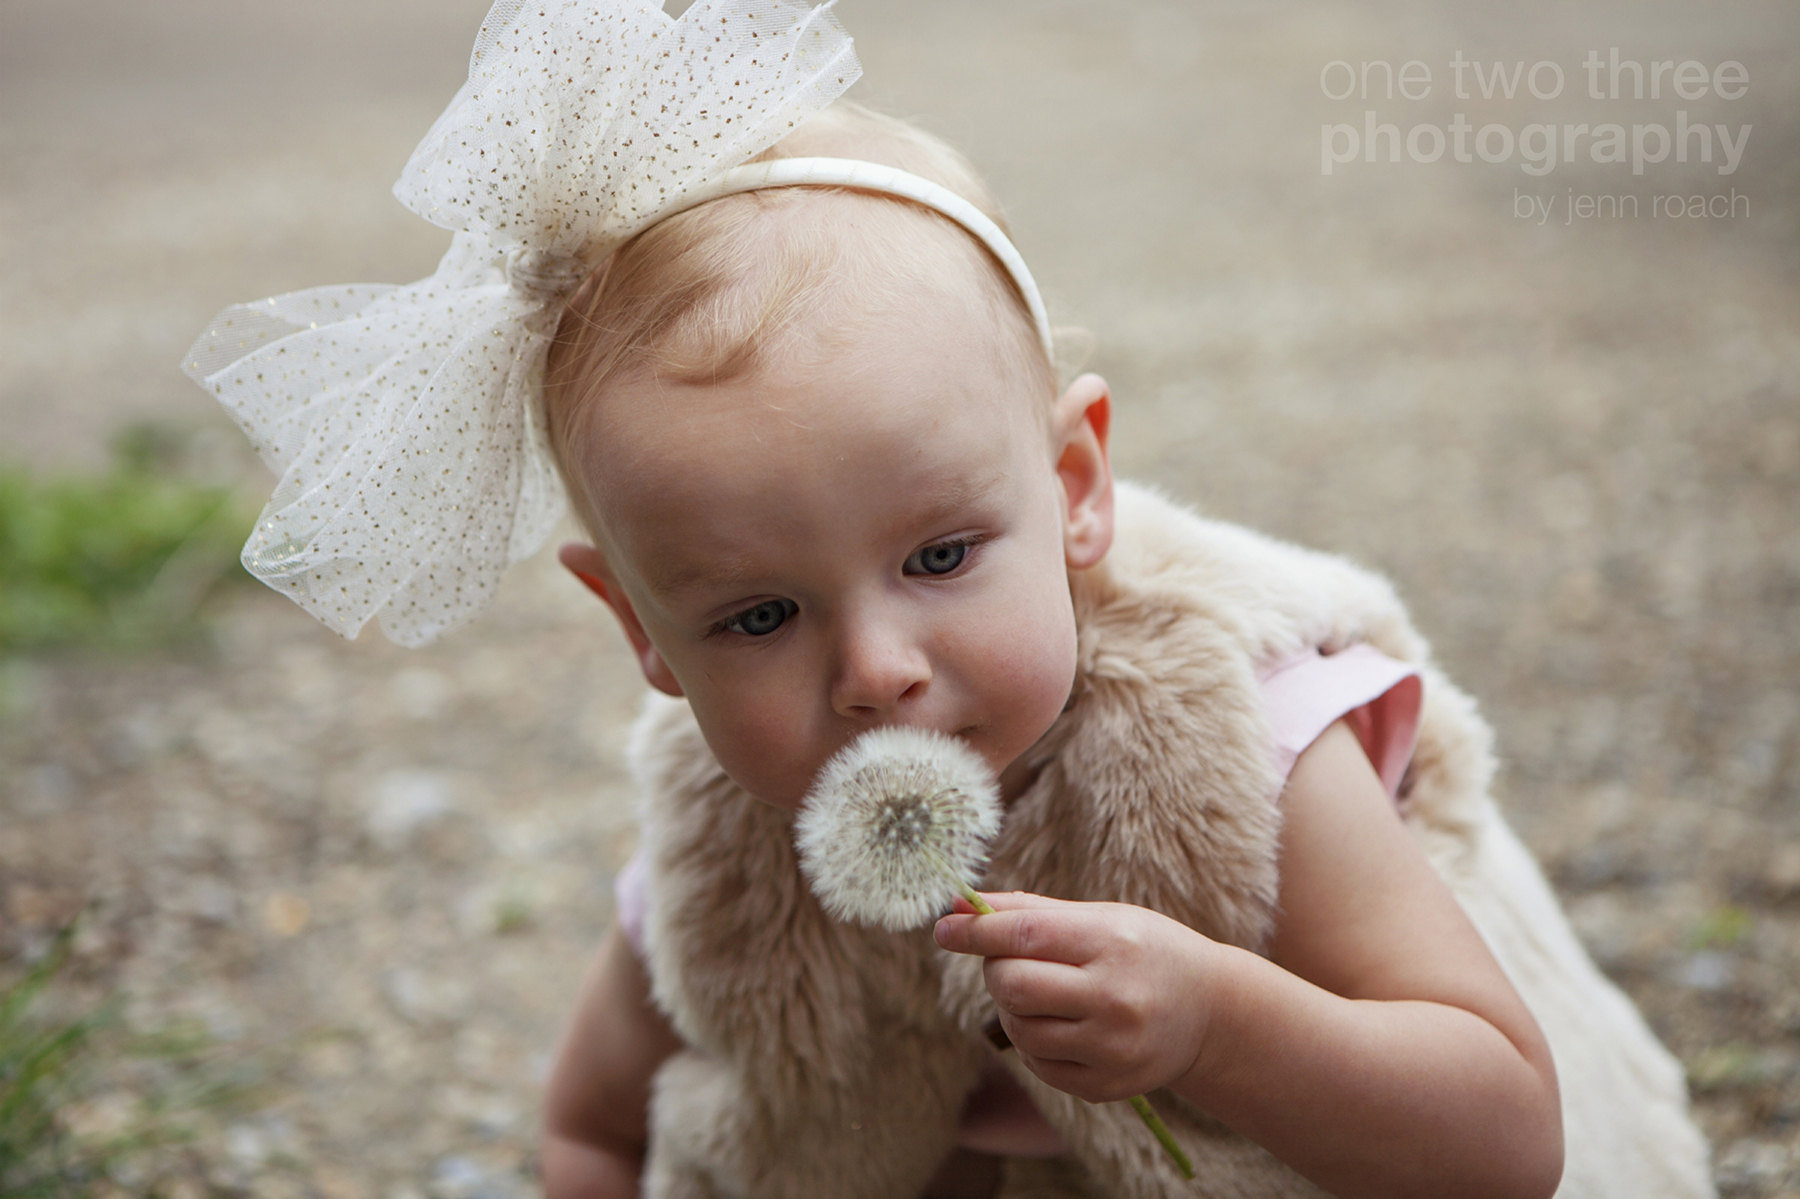 15 A little girl and a dandelion